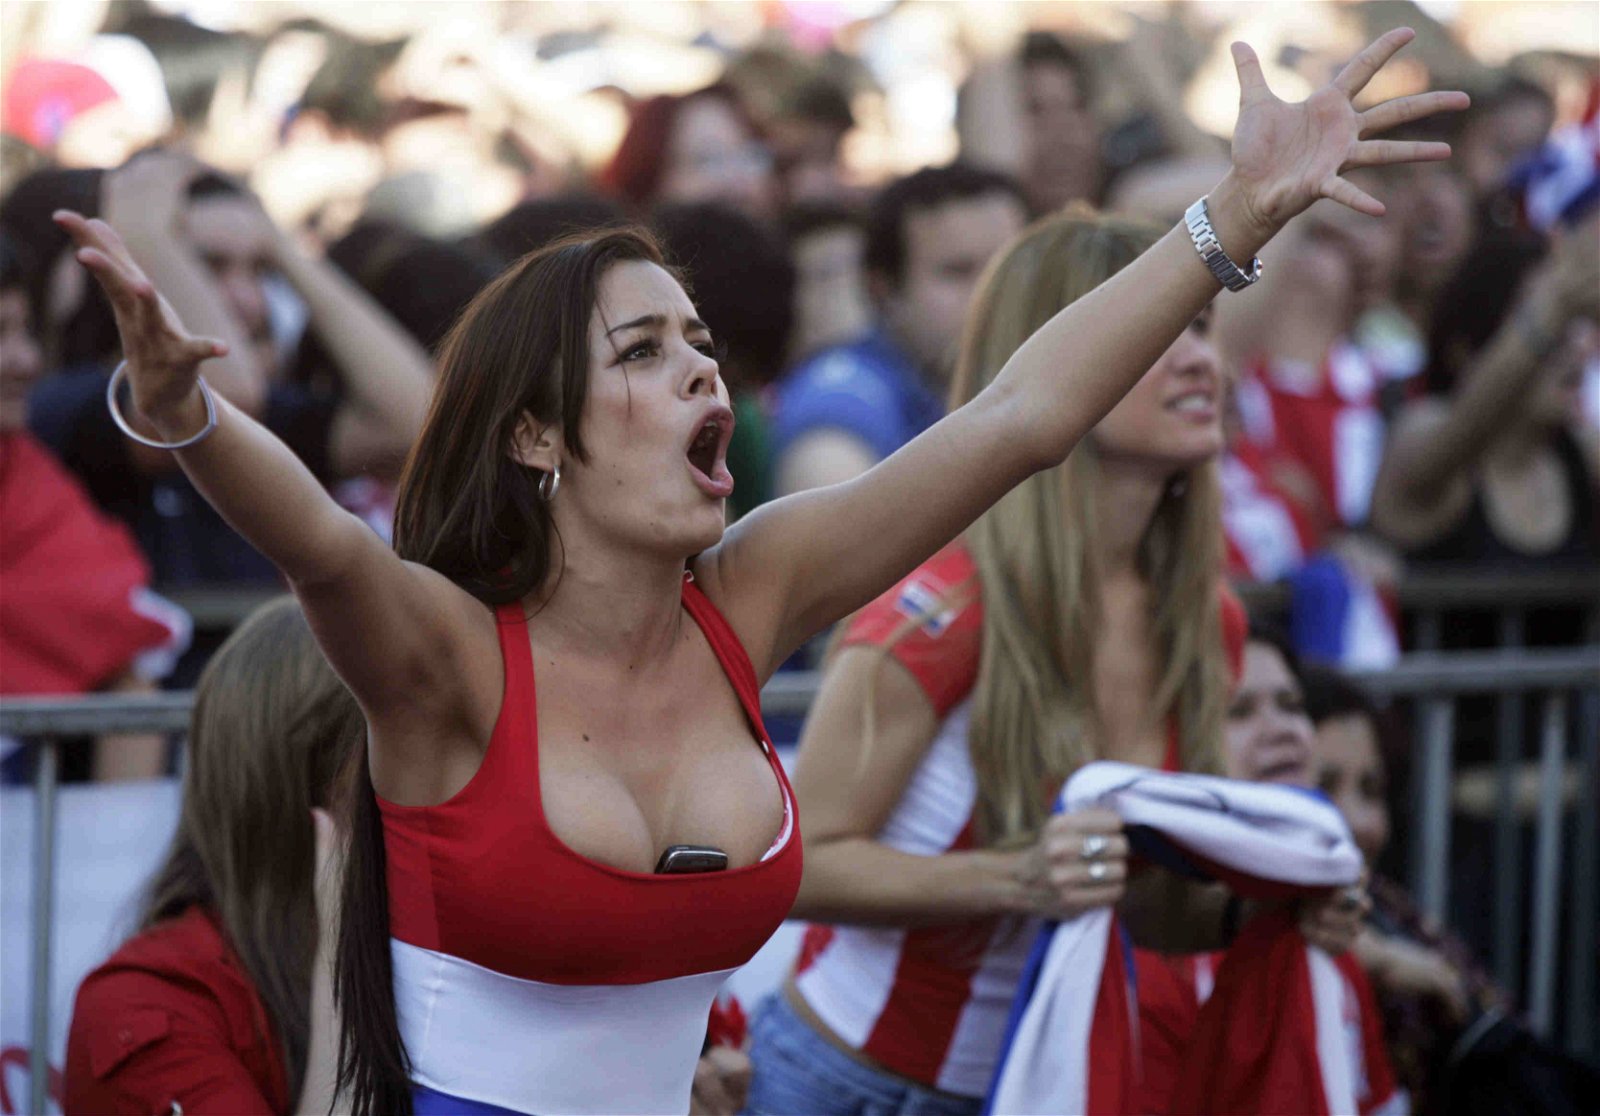 Top 10 Hottest Female Football Fans This World Cup - HOT pics & images!